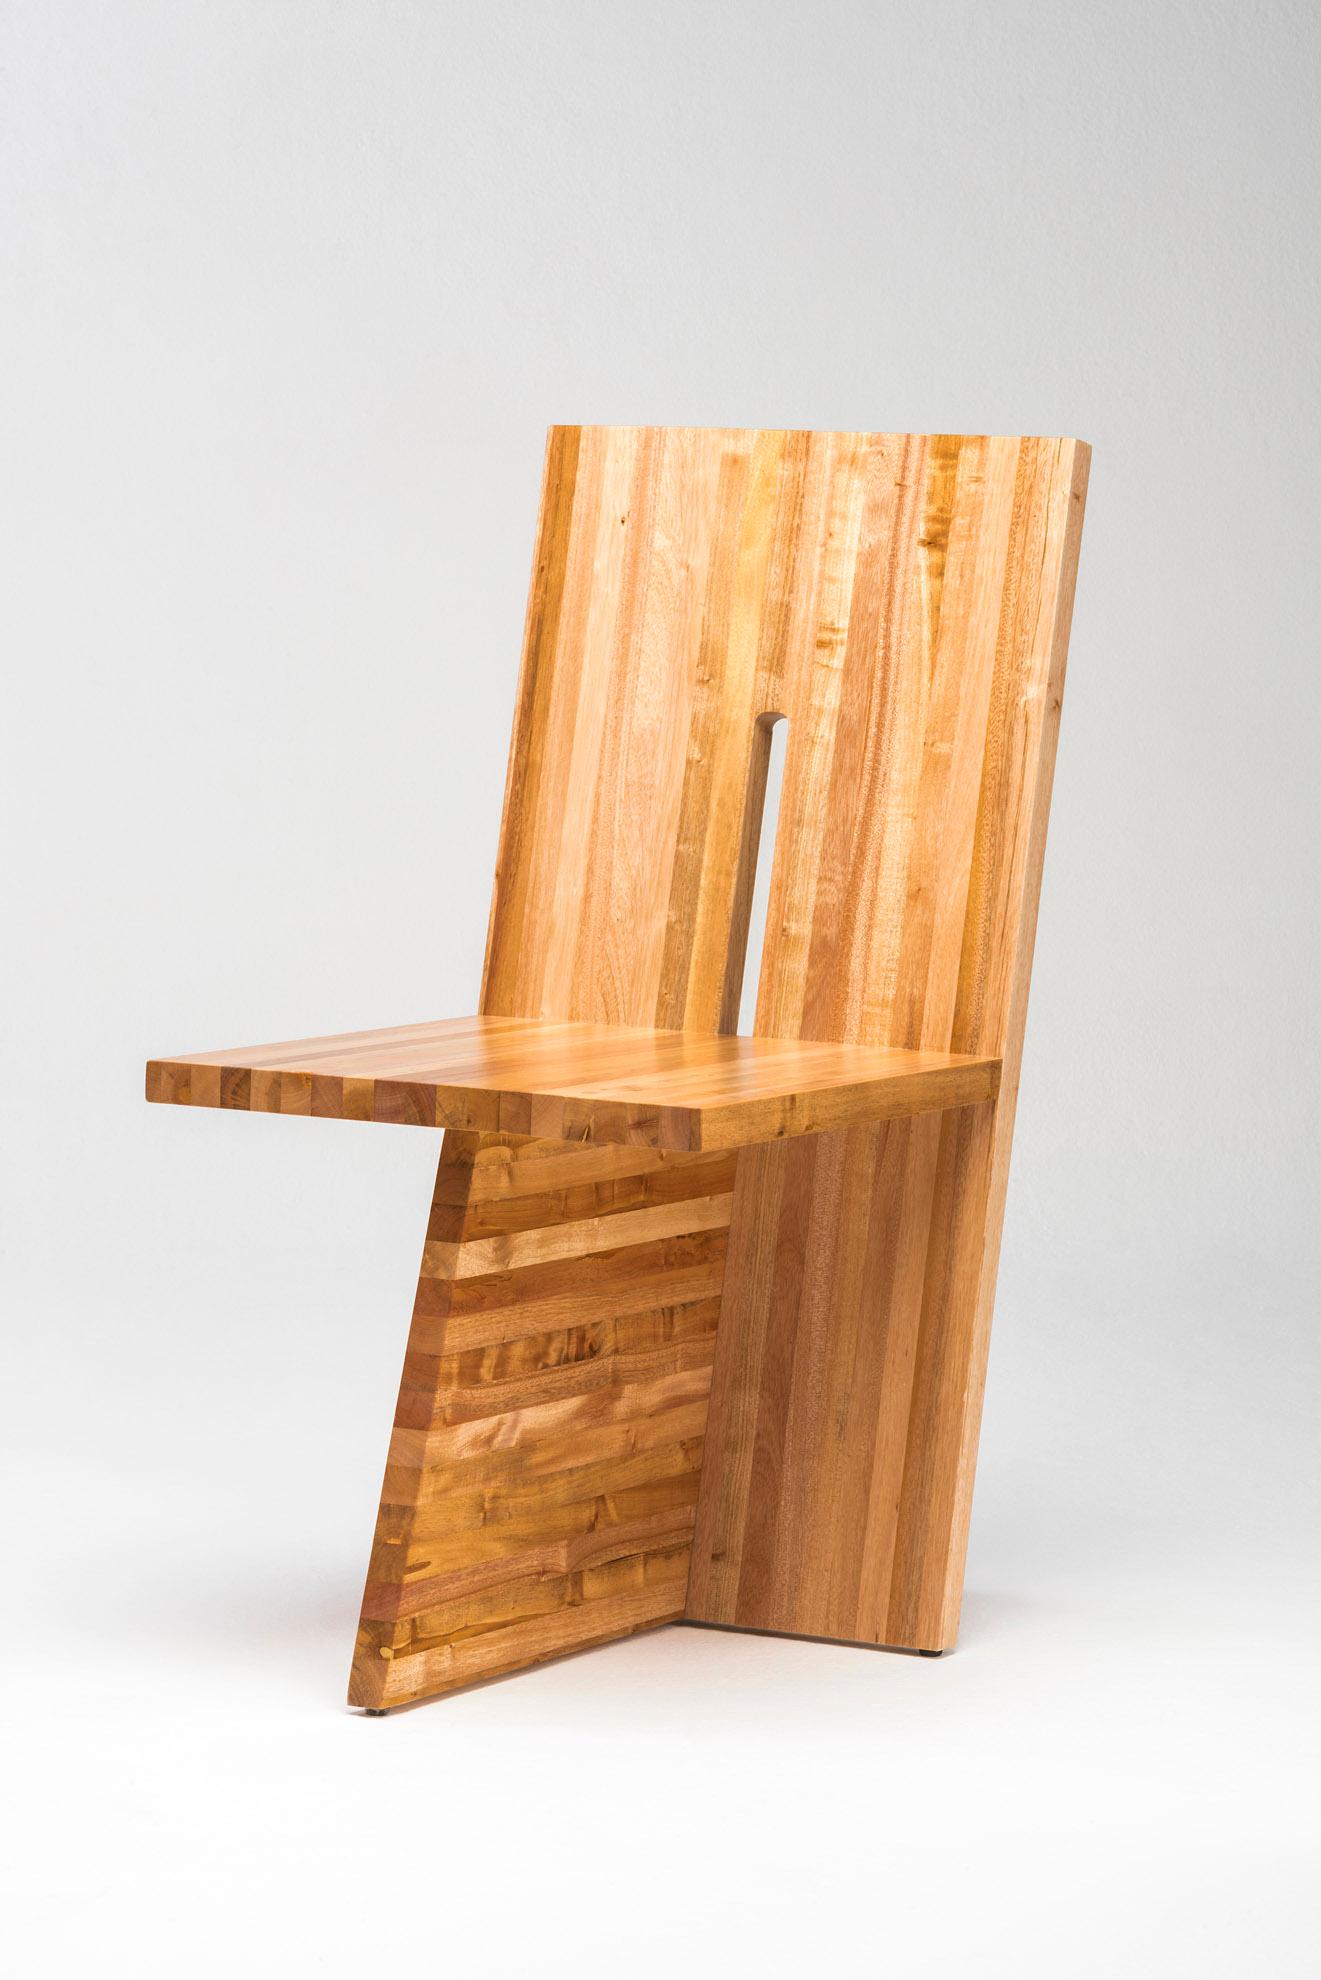 Contemporary chair by Juliana Lima Vasconcellos made in Solid African mahogany wood panel, with and architectural aesthetic formed by embedded planes that create an image of simplicity and balance.